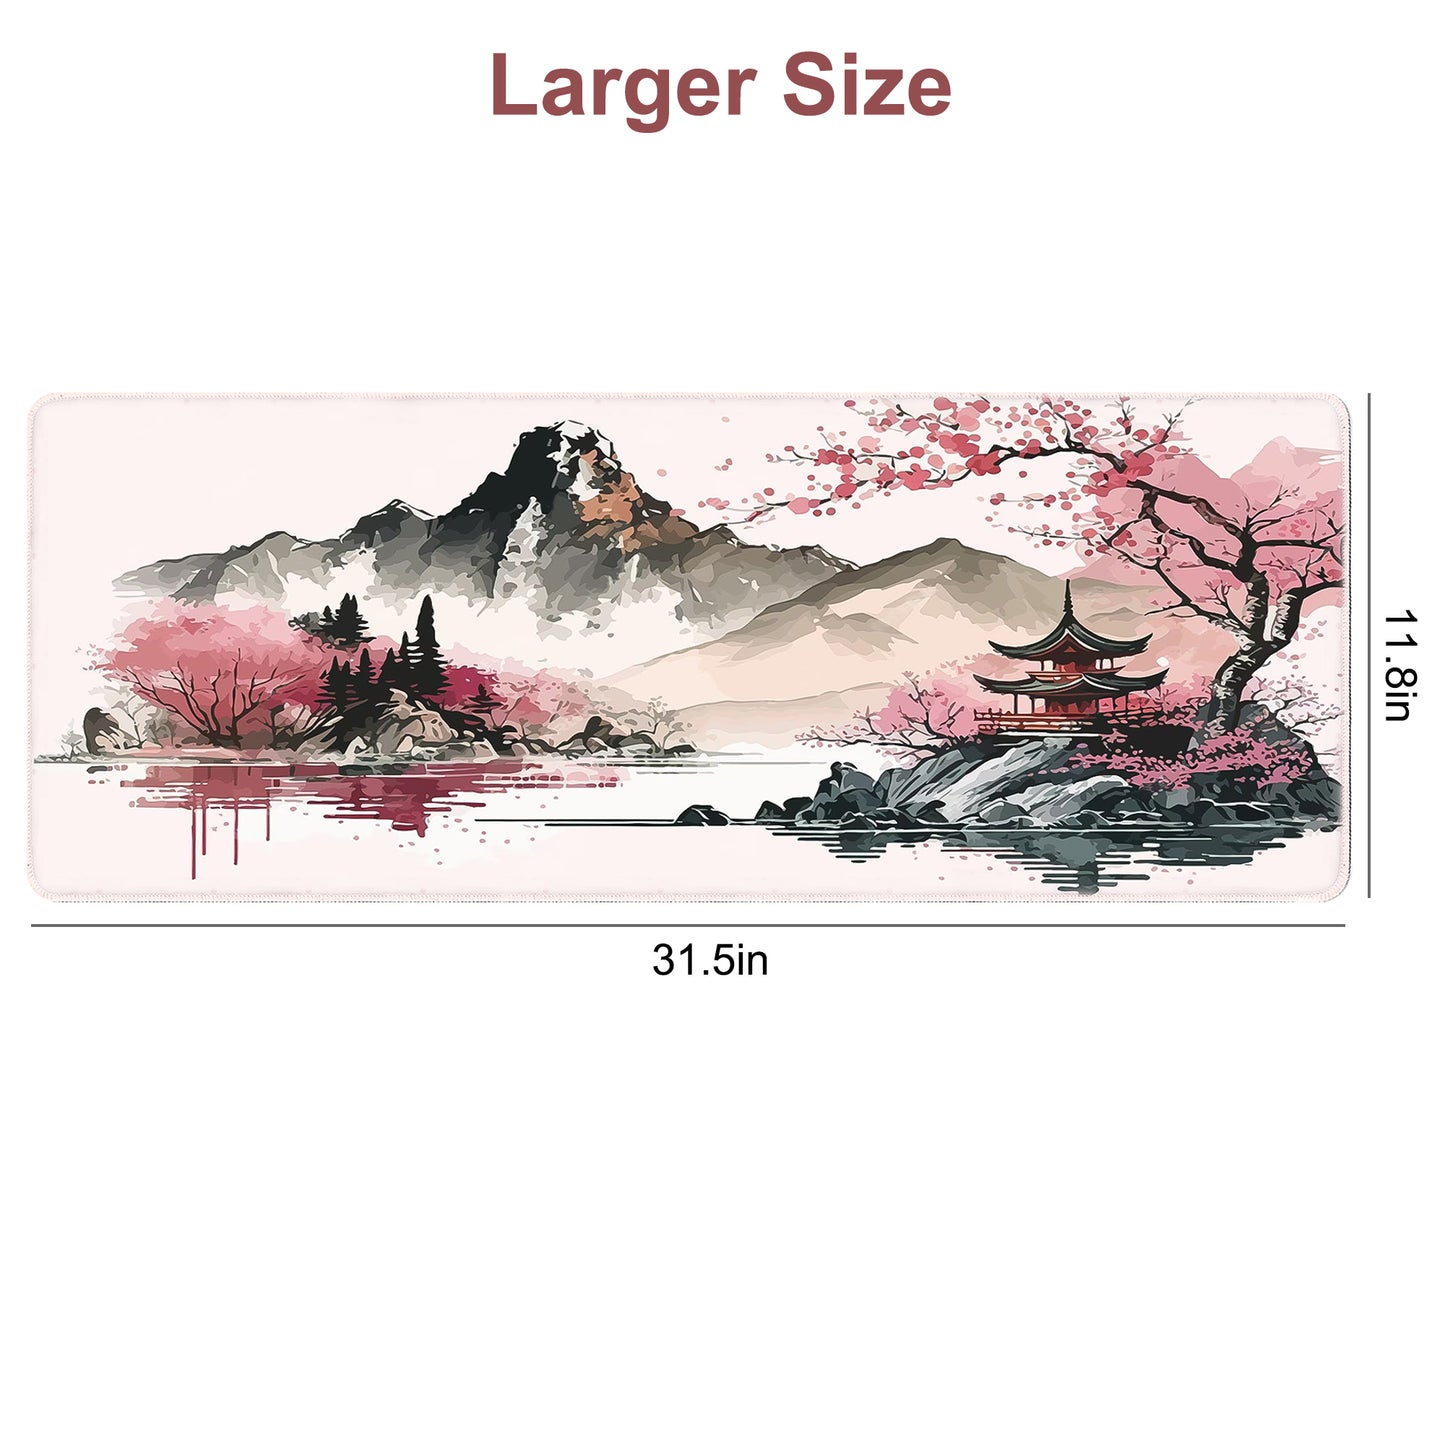 Watercolor Cherry Blossom Desk Large Mouse Pad - For Desk, Keyboard Mat Kawaii Black Cat Flower Mouse Pad Green Desk Mat Desk Decor With Stitched Edges Non-Slip Large Computer Mat 31.5 x 11.8 in